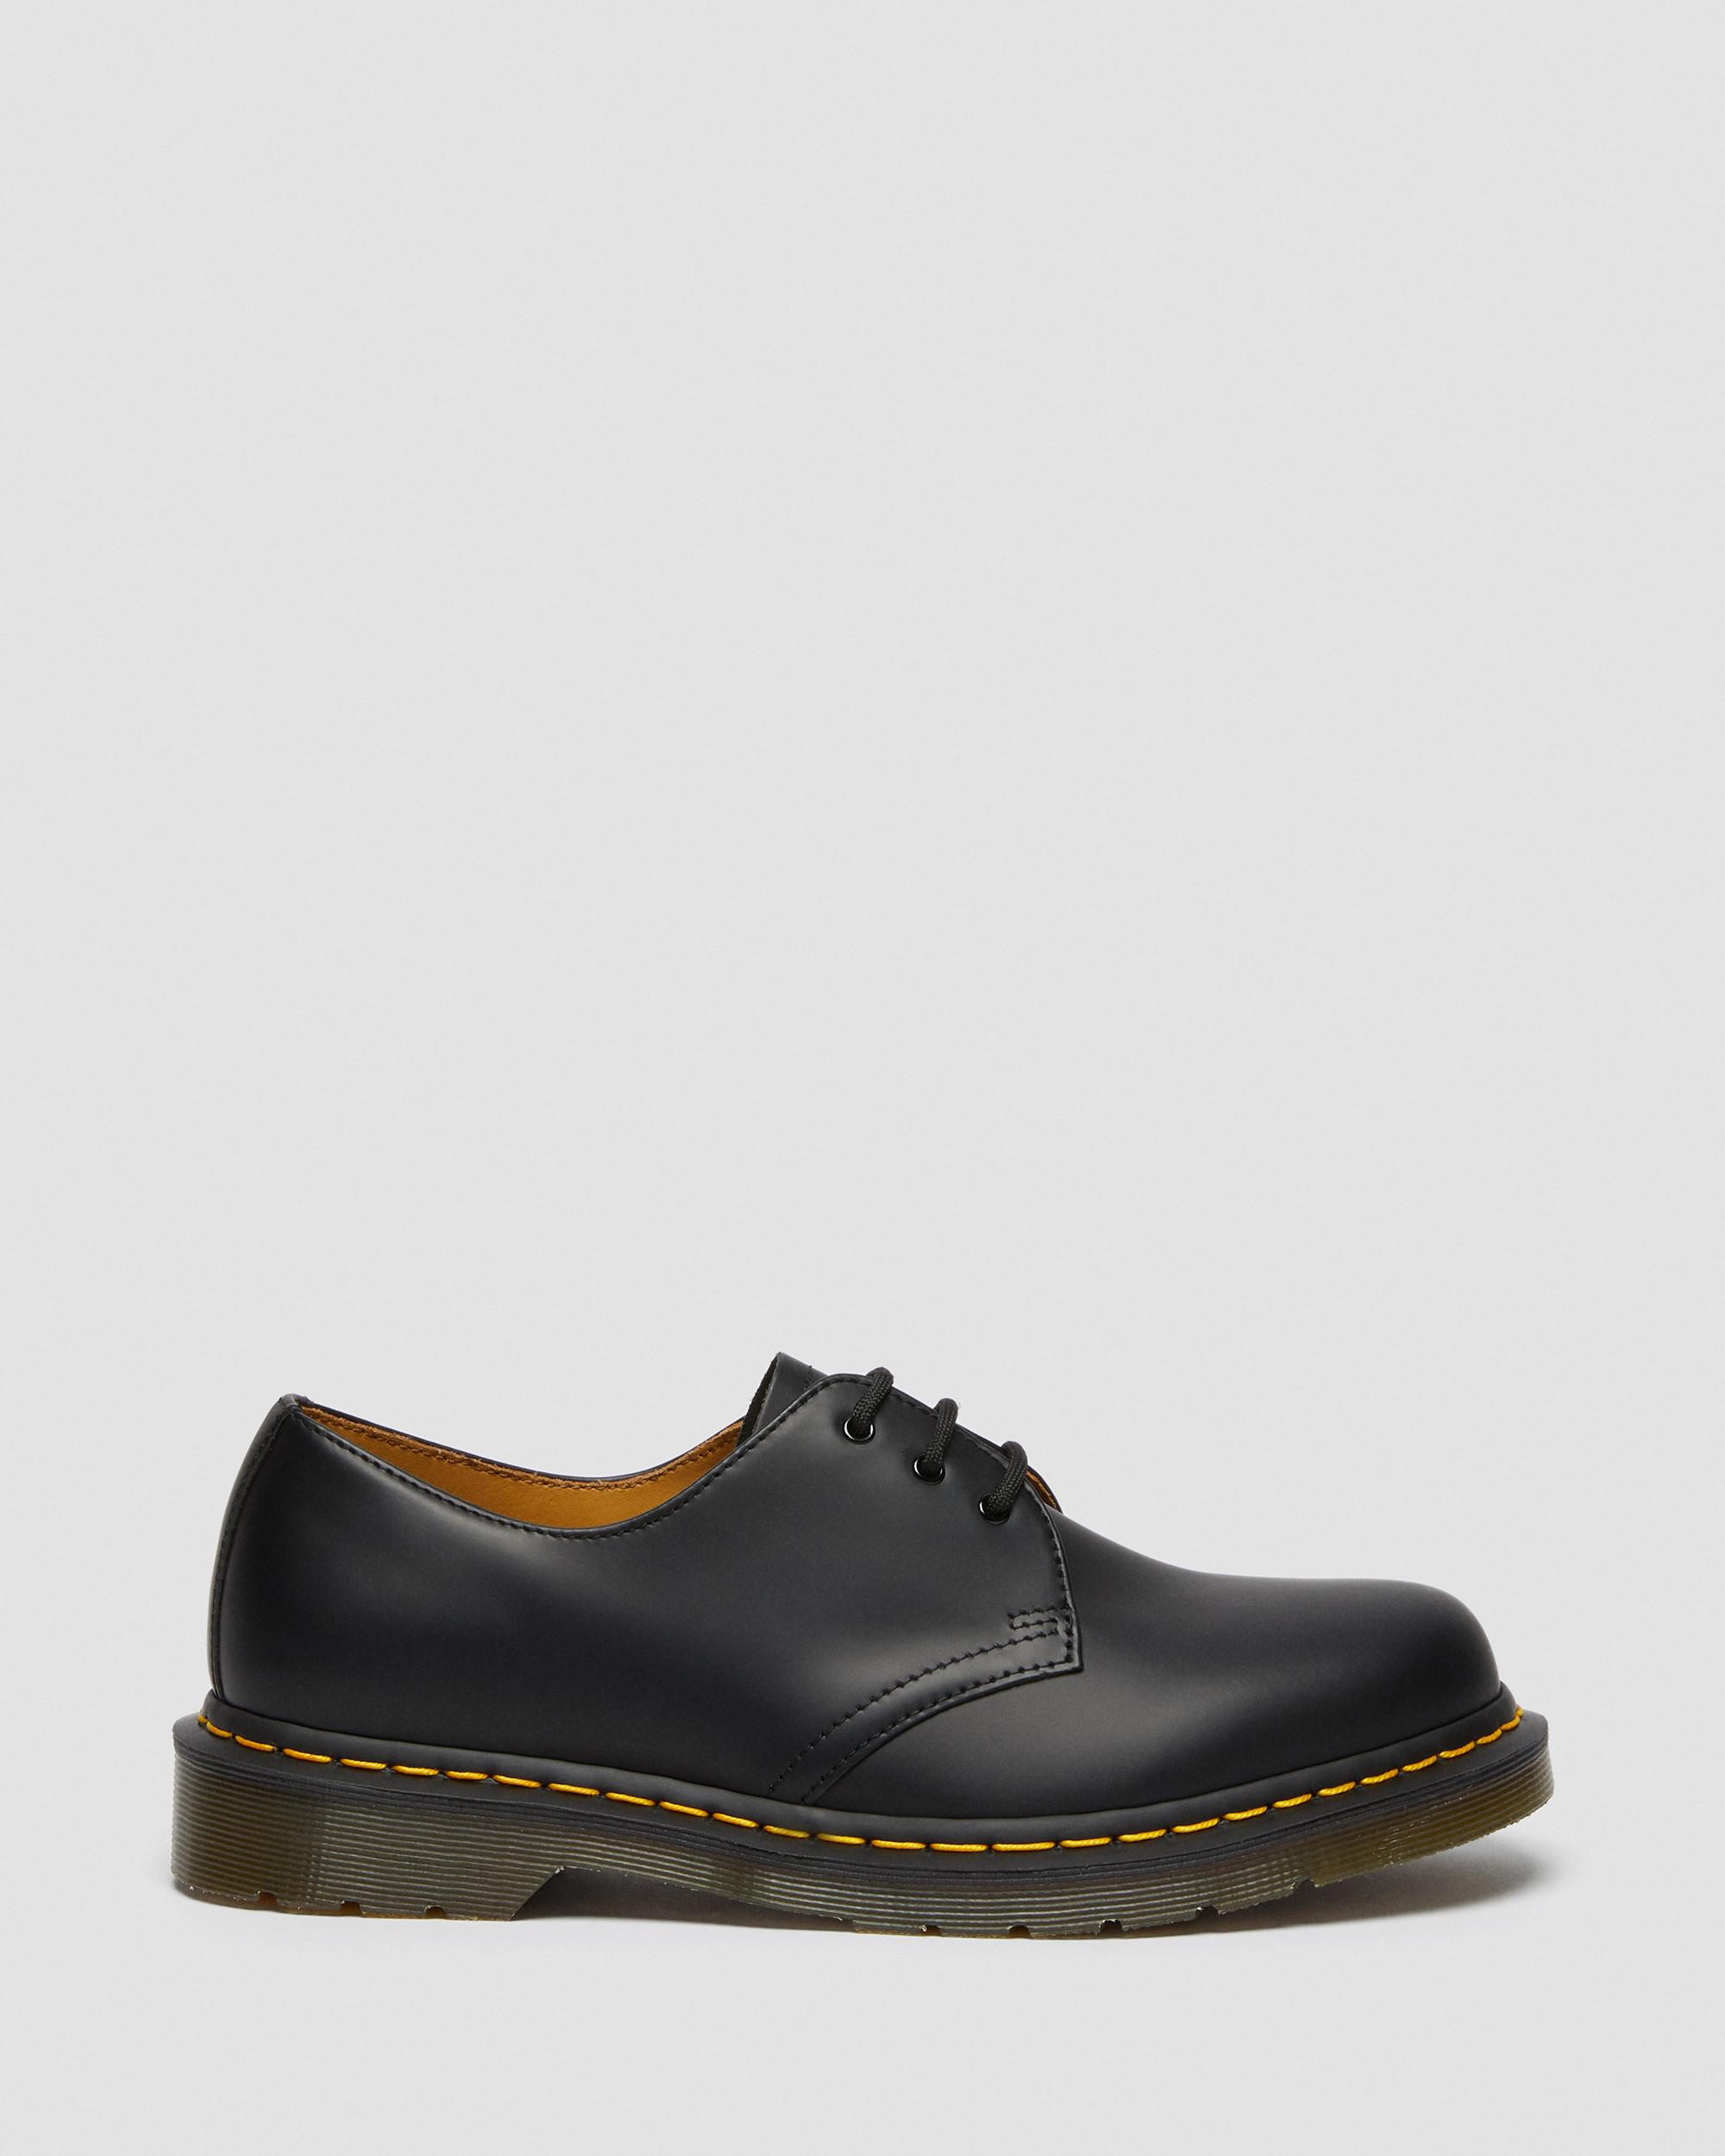 1461 Smooth Leather Oxford Shoes, Black | Dr. Martens